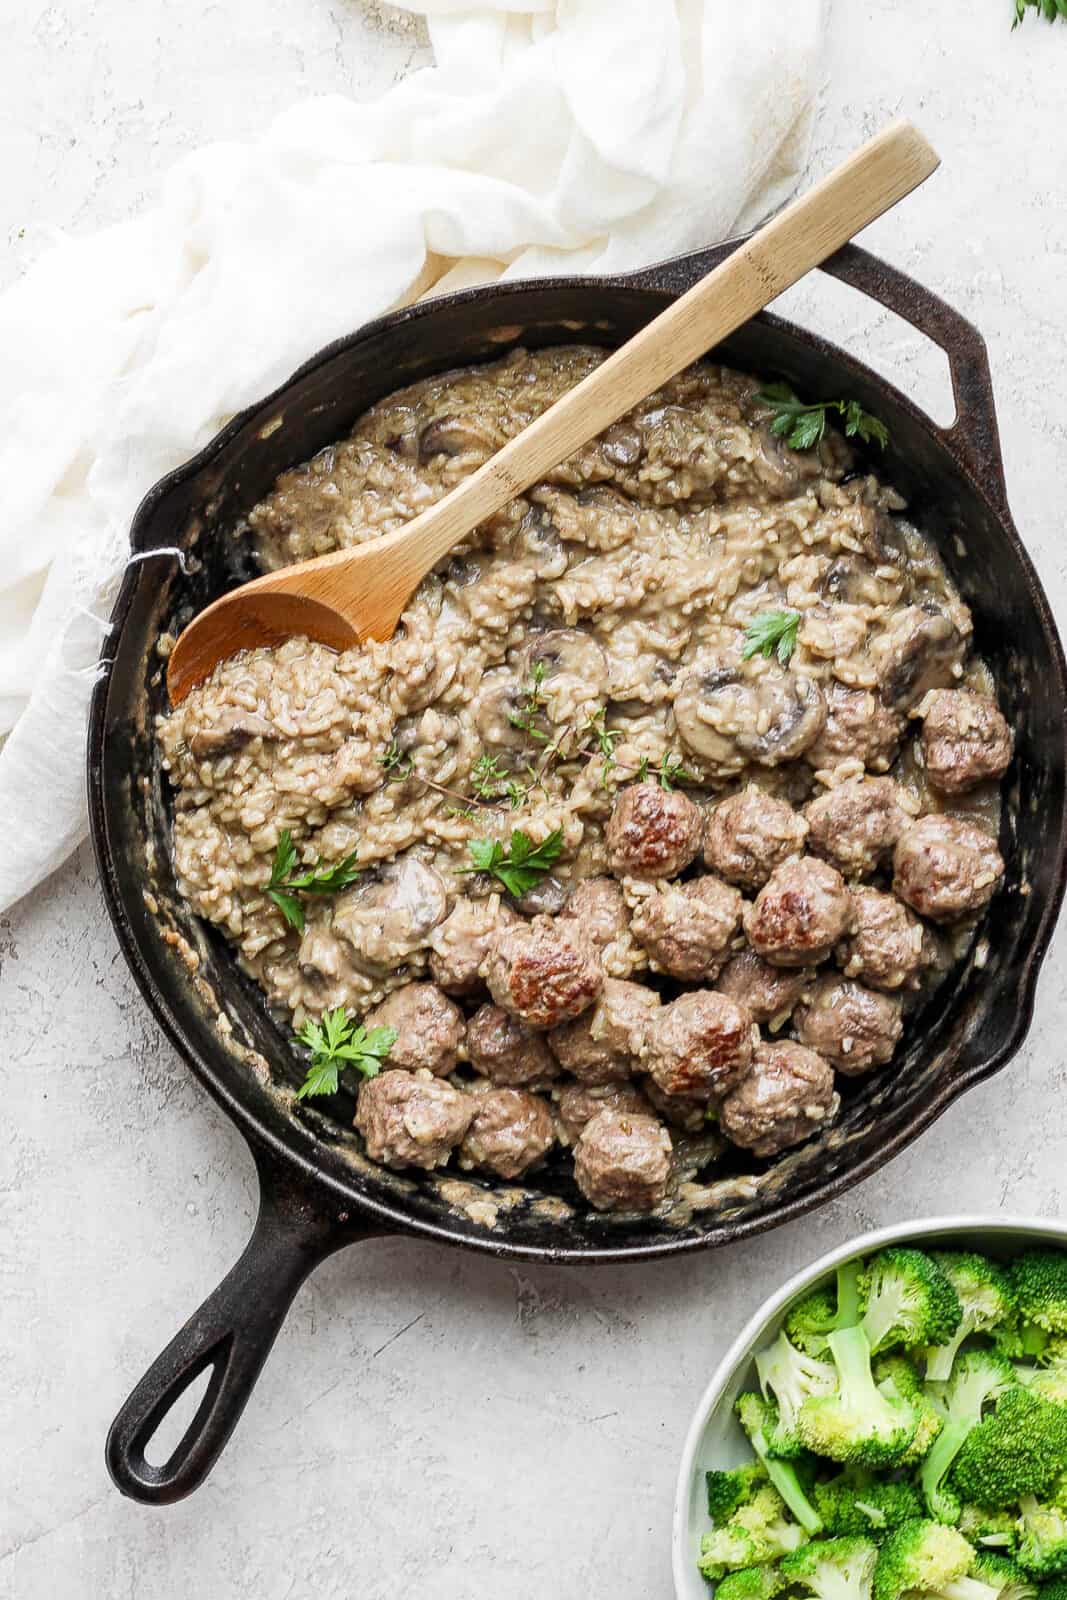 Meatballs and rice in a cast iron skillet plus a side of broccoli.